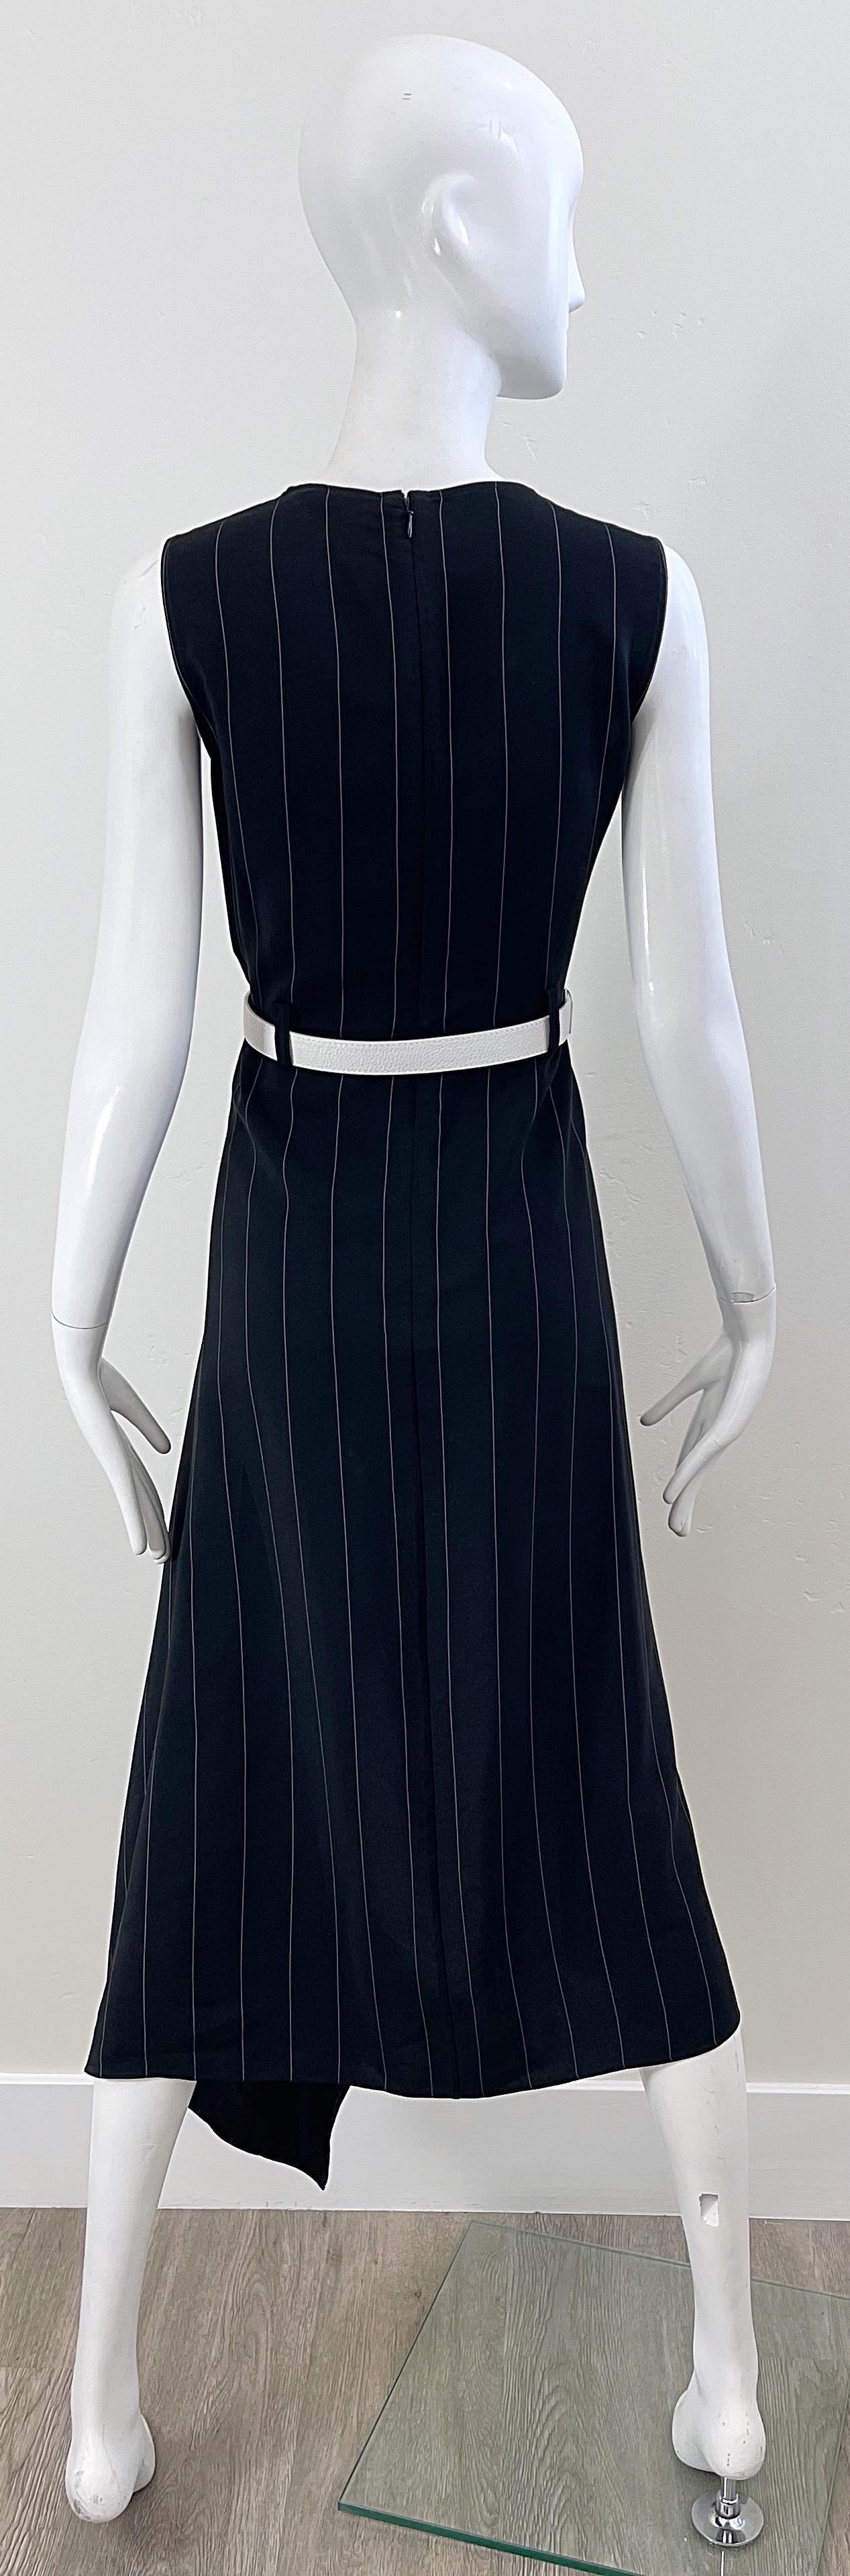 2000s Thierry Mugler Black and White Size 38 / 6 Pinstripe Hi-Lo Vintage Dress For Sale 10